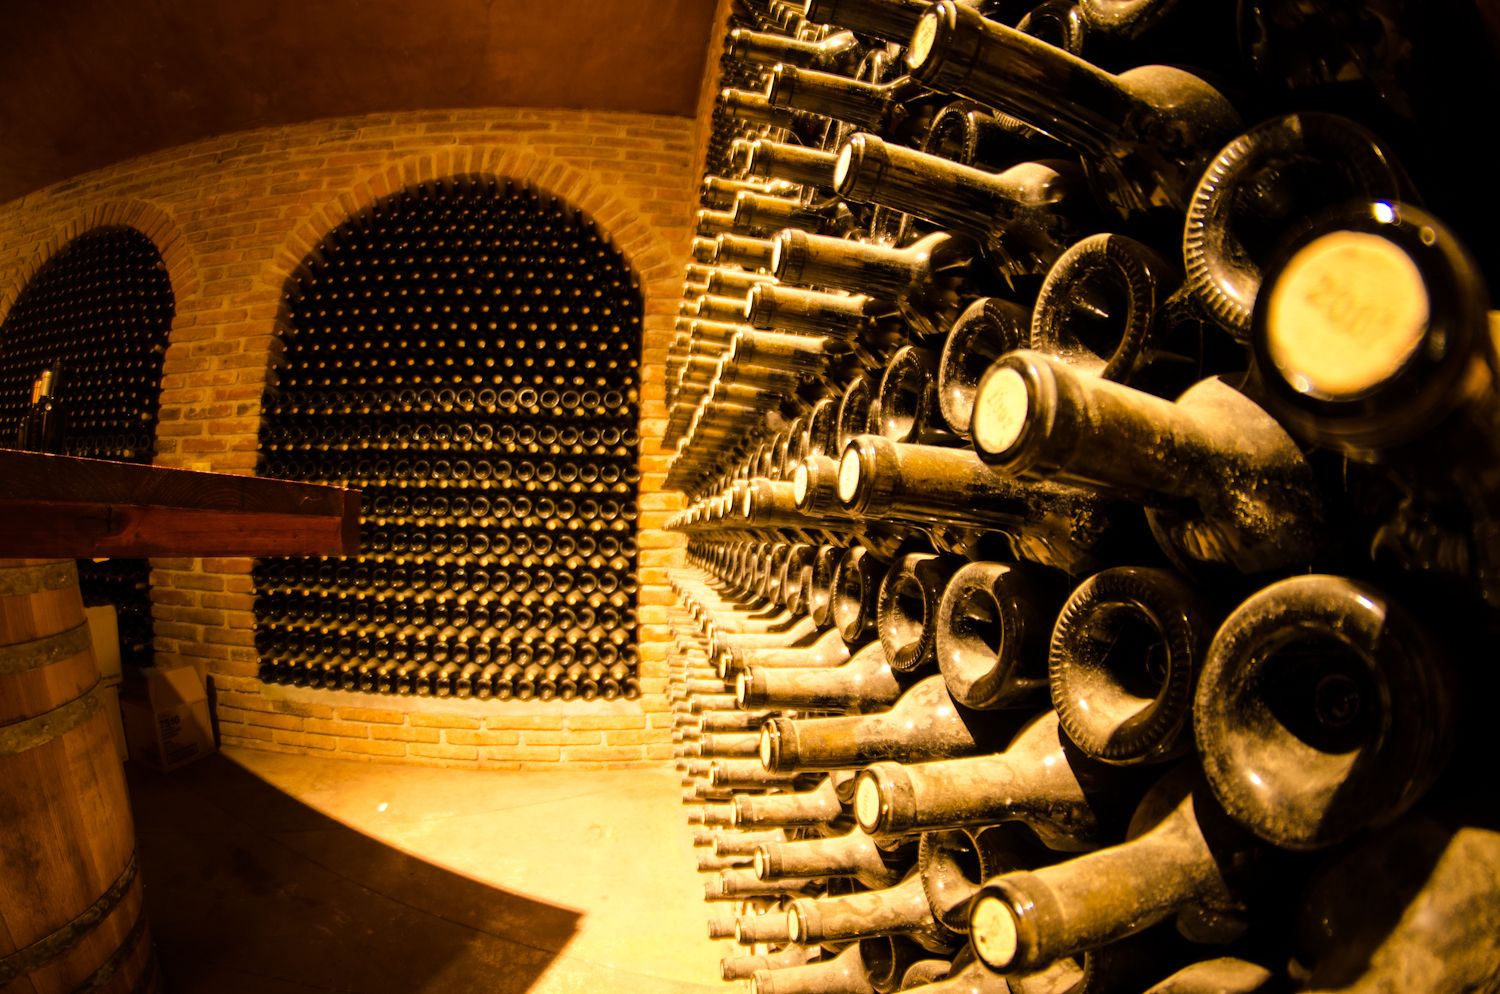 A bunch of bottles in a wine cellar